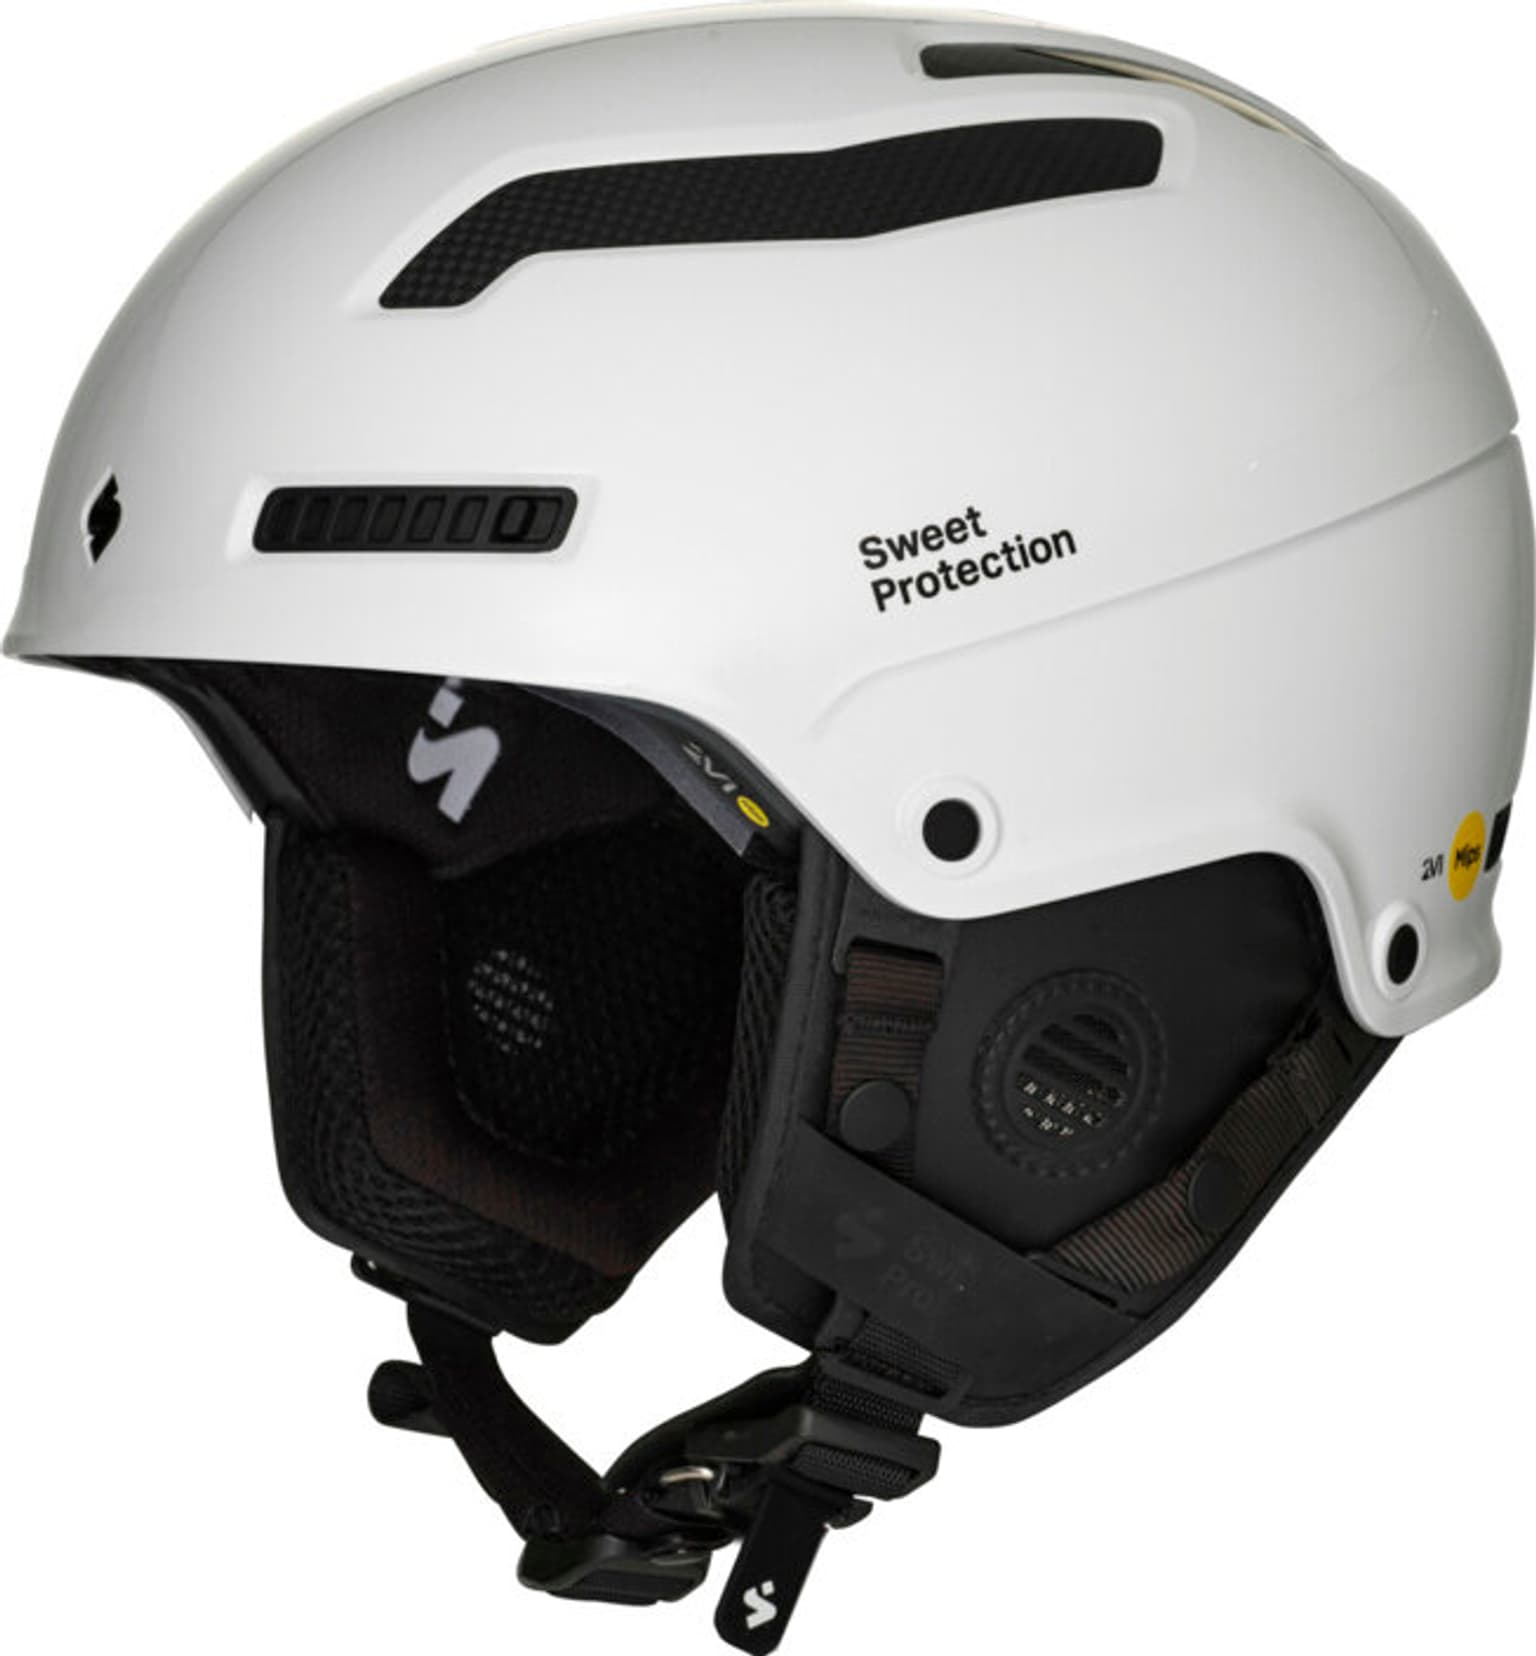 Sweet Protection Sweet Protection Trooper 2Vi Mips Casque de ski blanc 1